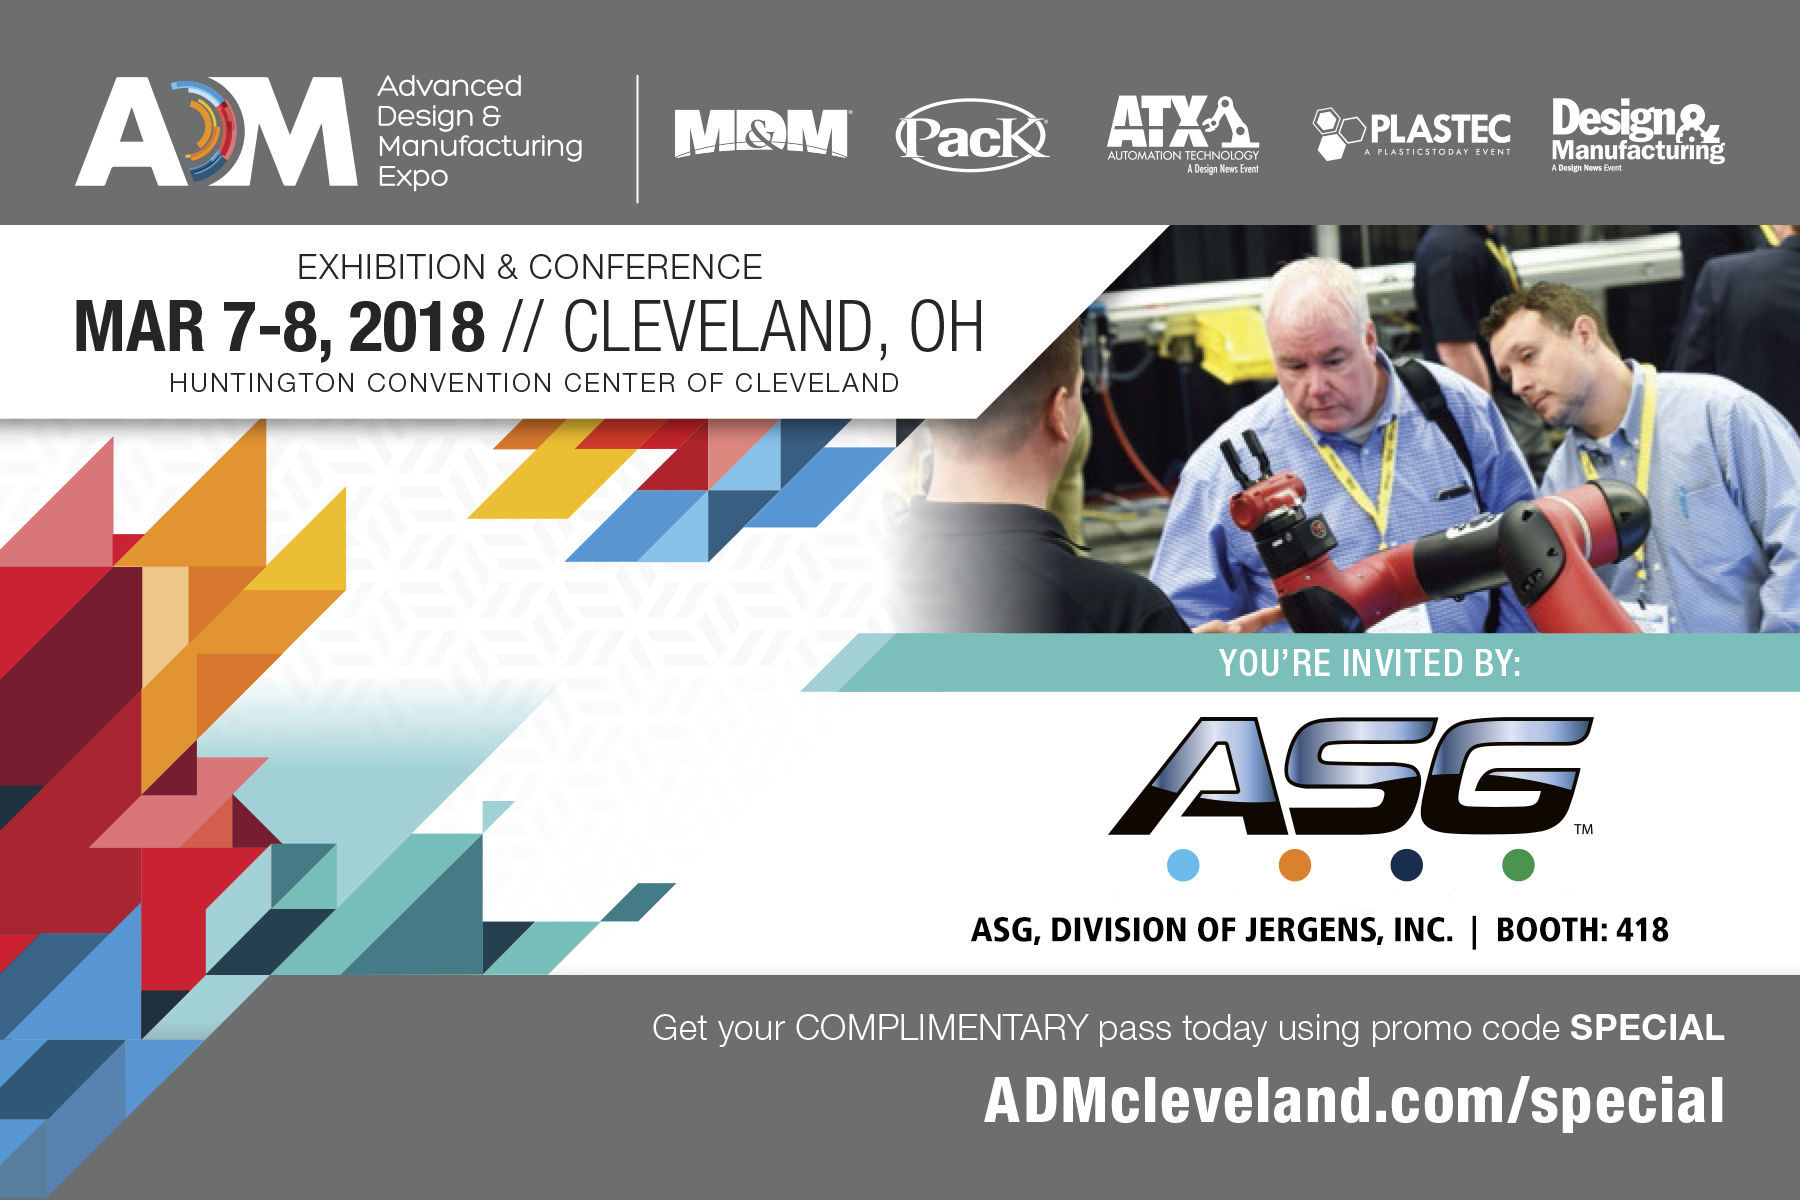 Complimentary Invitation to ADM Cleveland